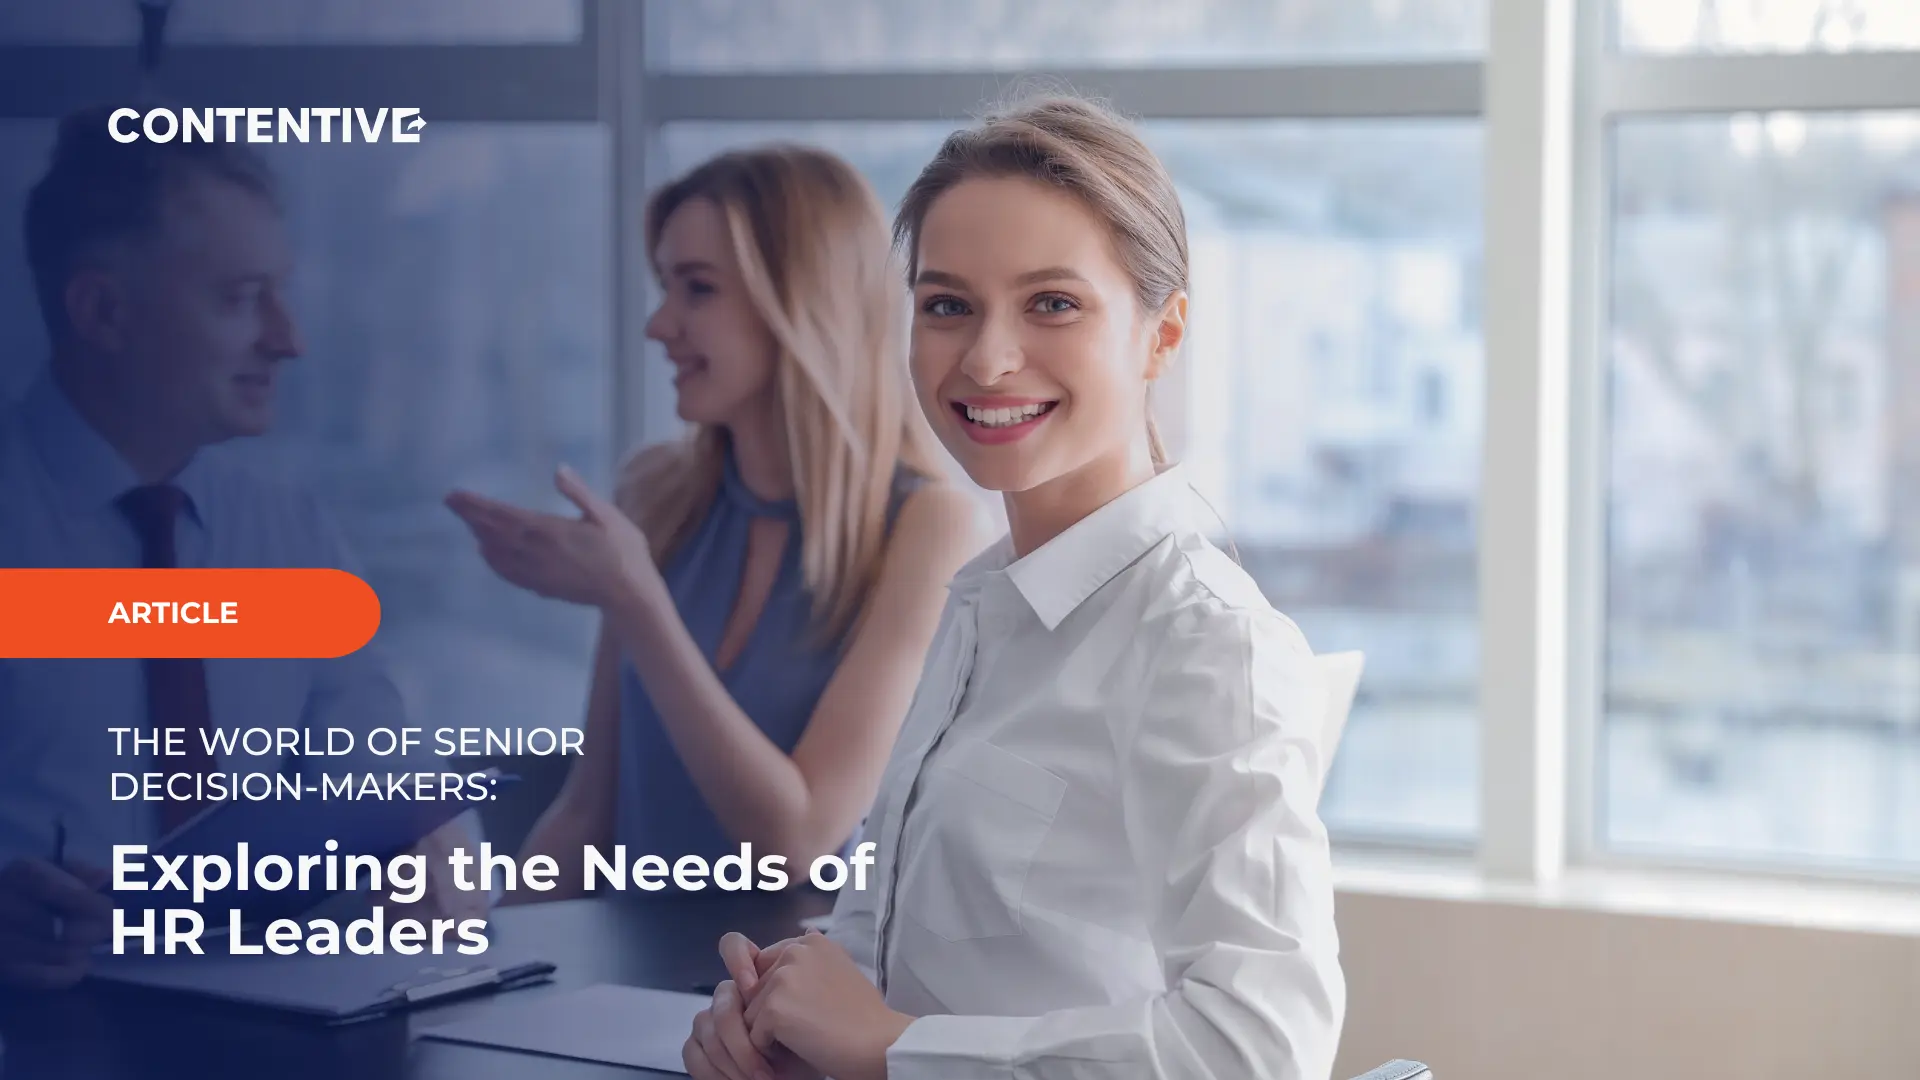 The World of Senior Decision-Makers: Exploring the Needs of HR Leaders